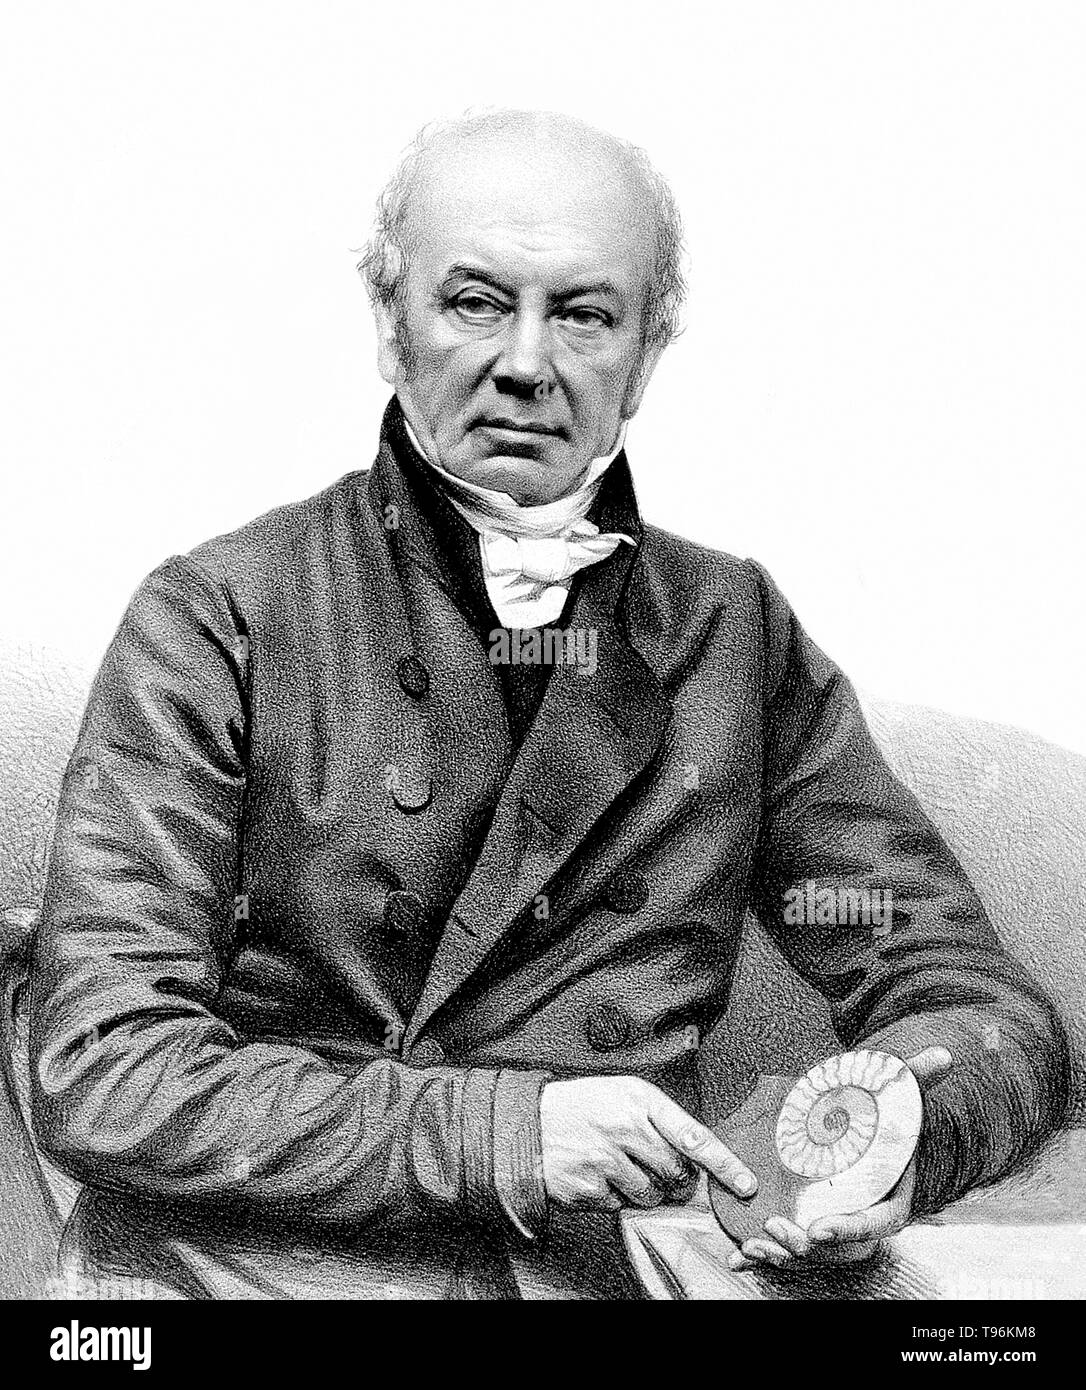 William Buckland (March 12, 1784 - August, 14 1856) the English geologist and paleontologist who wrote the first full account of a fossil dinosaur, which he called ''megalosaurus,'' or ''great lizard.'' He was a pioneer in the use of fossilized feces, for which he coined the term coprolites, to reconstruct ancient ecosystems. Stock Photo